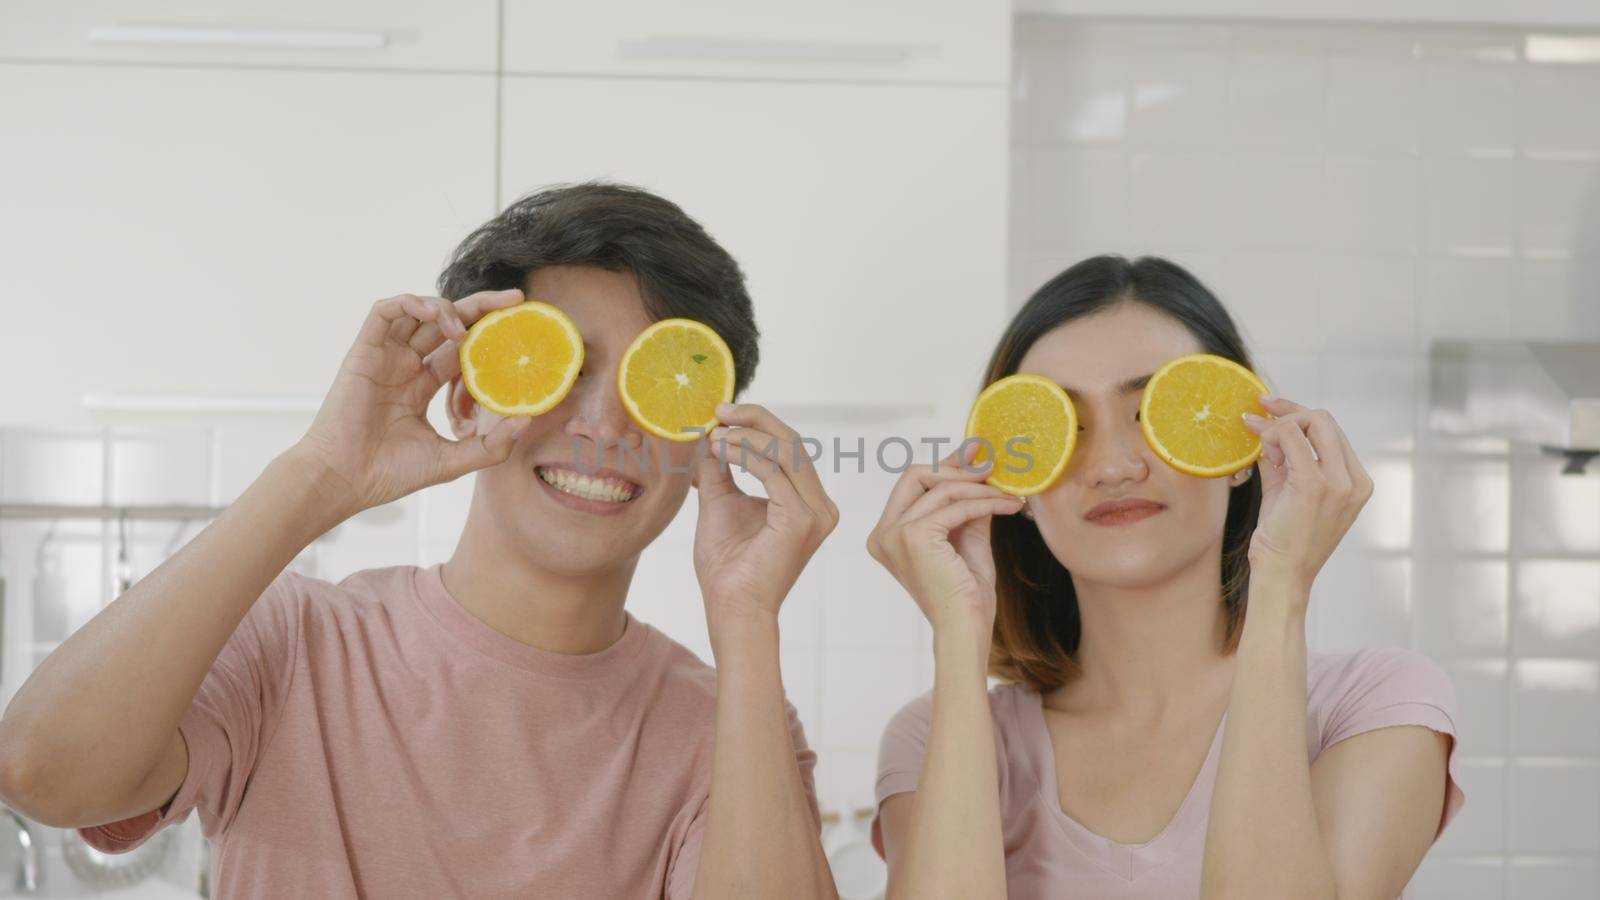 couple husband and wife enjoying smile and laugh holds a cut orange in front of the guy's eyes by Sorapop